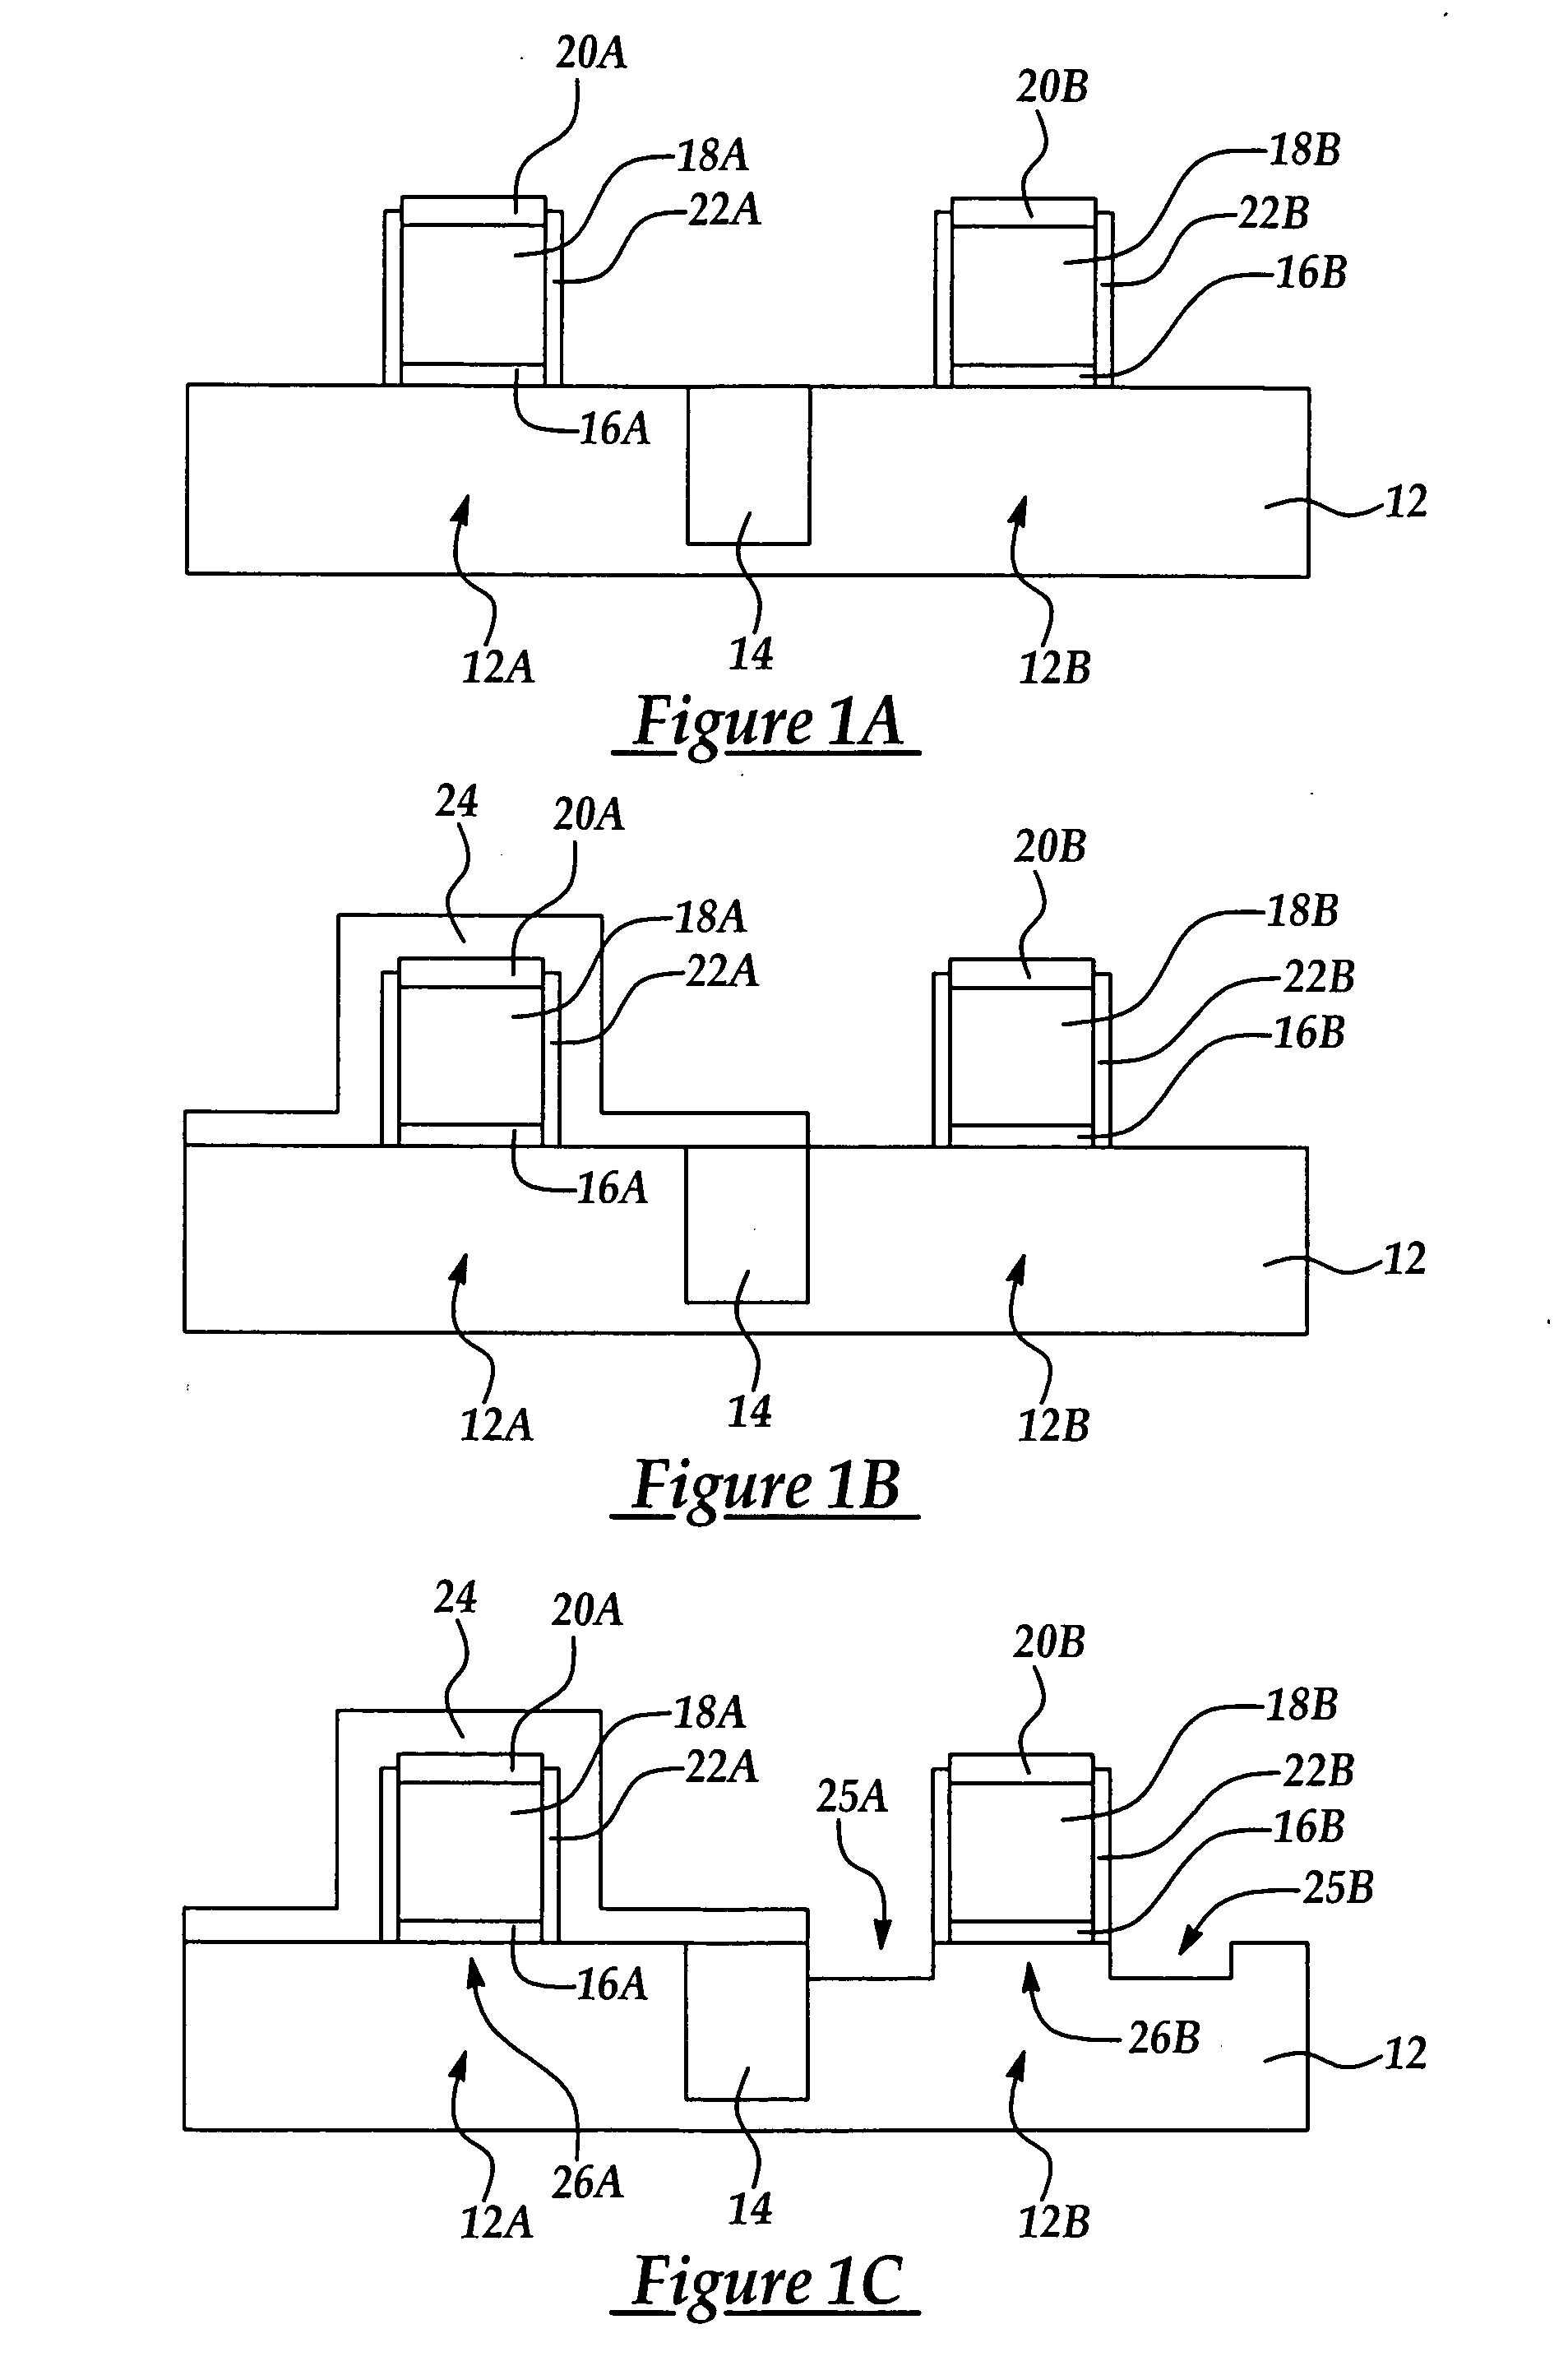 Strained channel CMOS device with fully silicided gate electrode